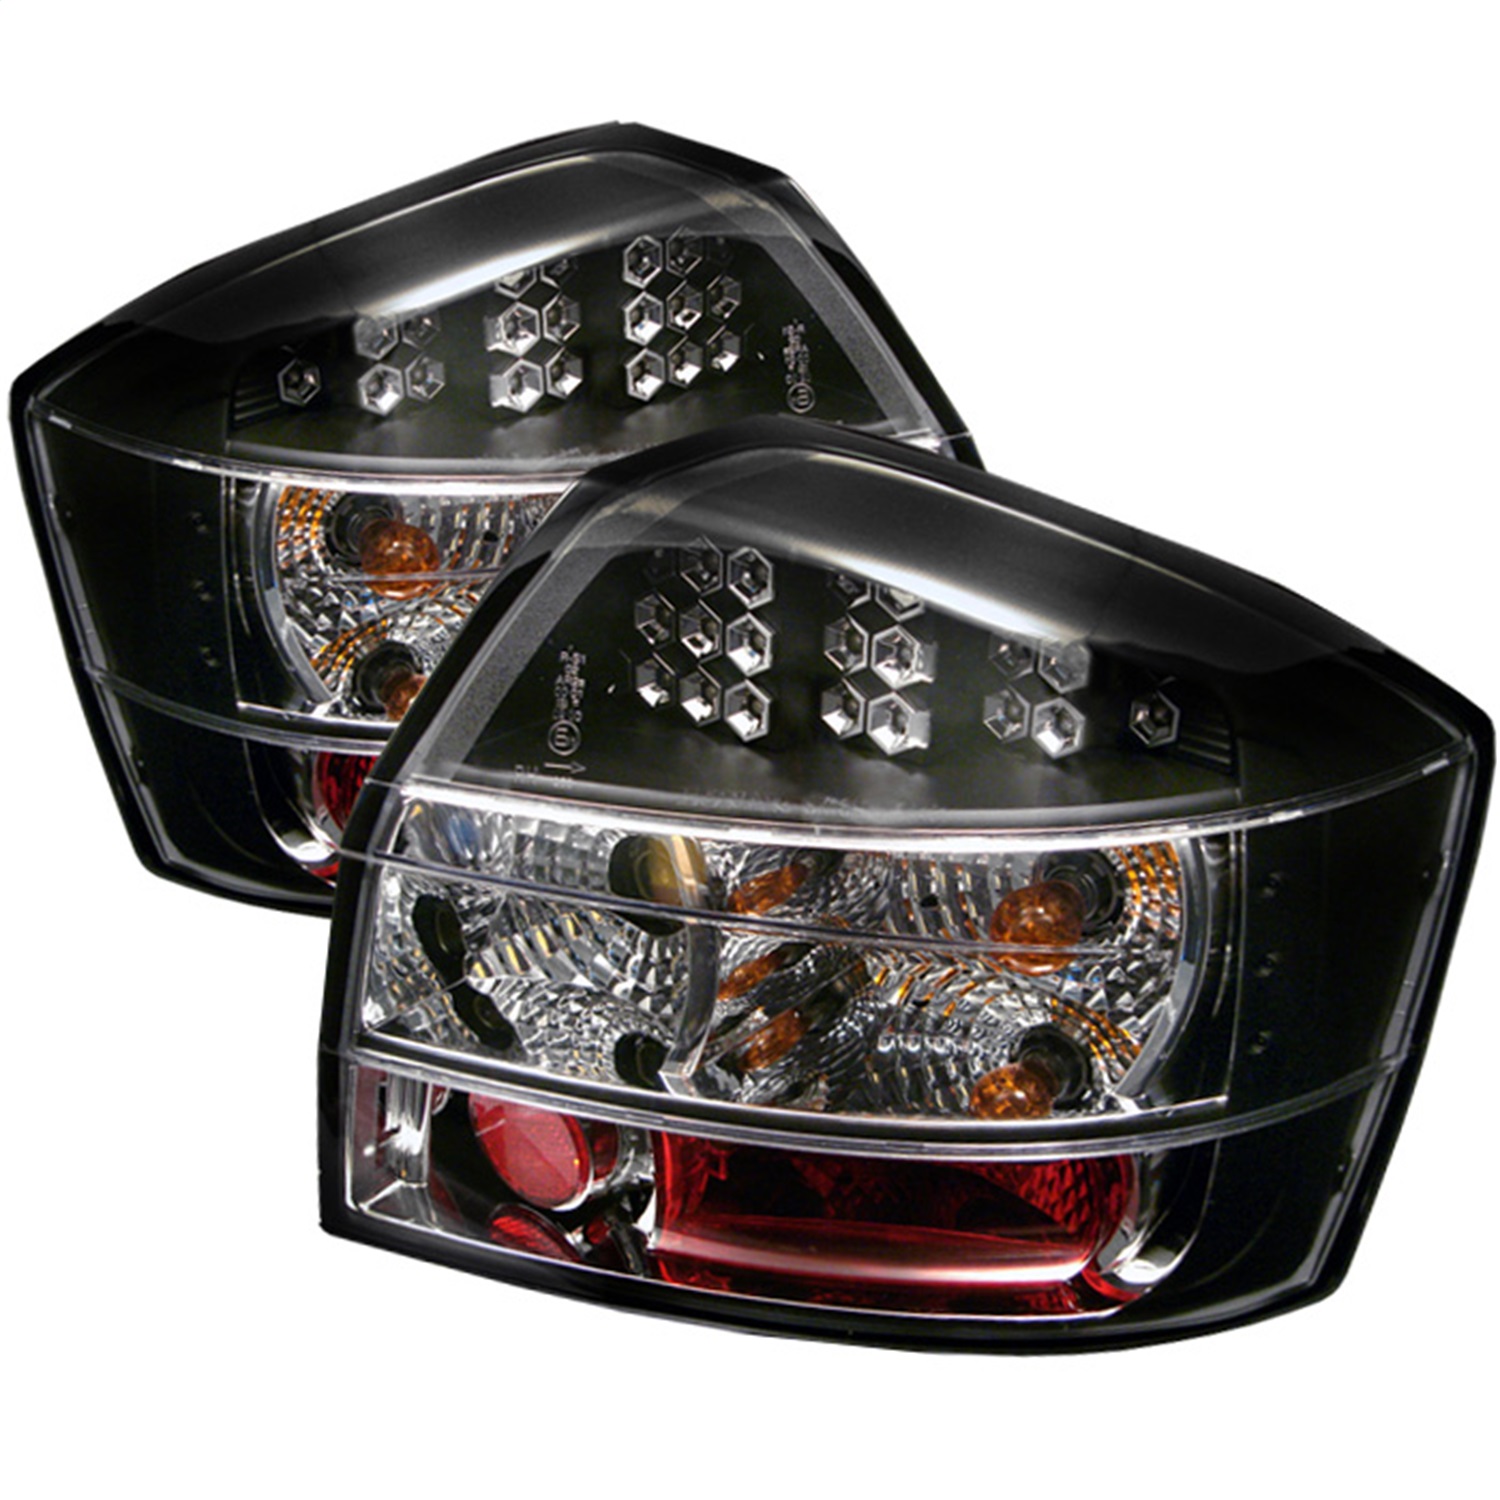 Spyder Auto 5000026 LED Tail Lights Fits 02-05 A4 A4 Quattro